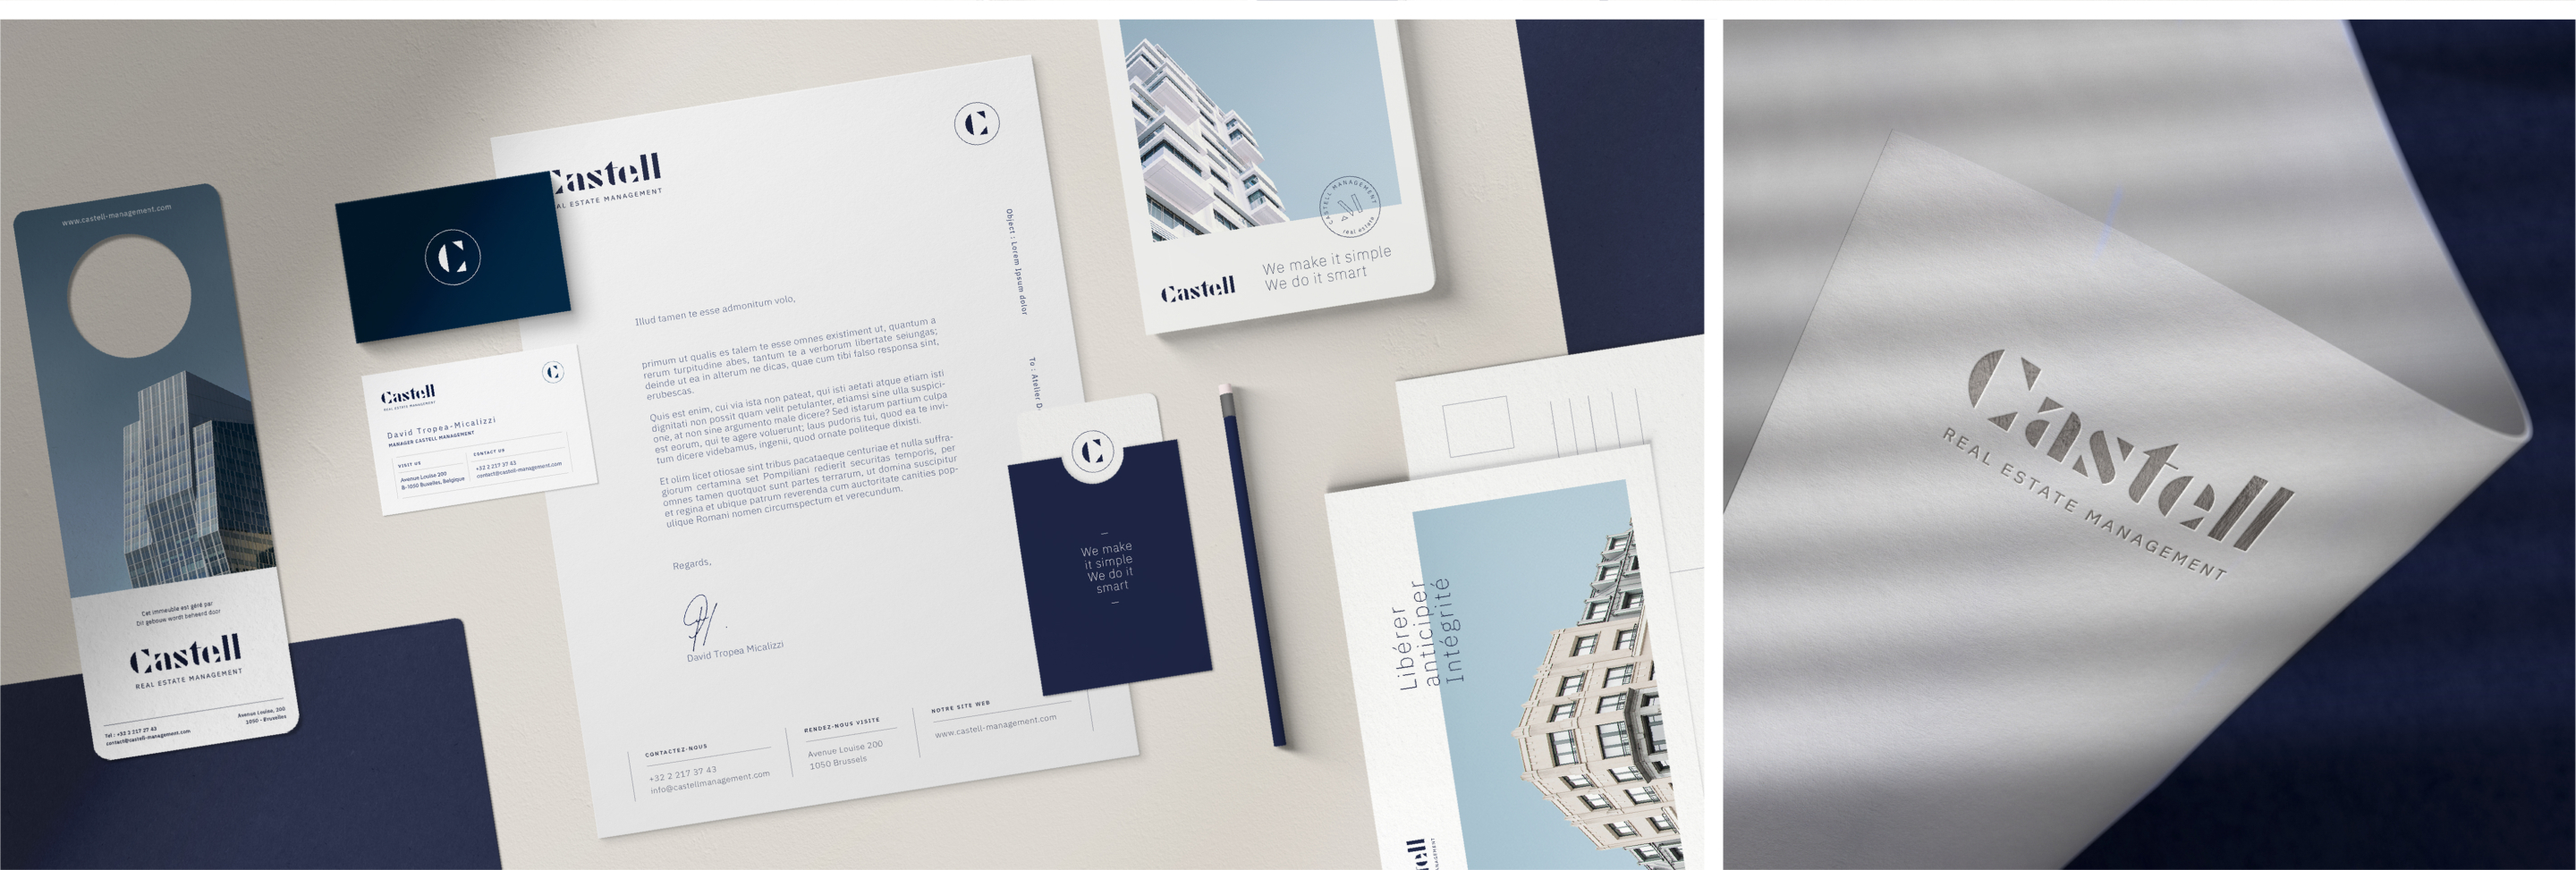 Creation of Castell Management's communication materials by Atelier Design